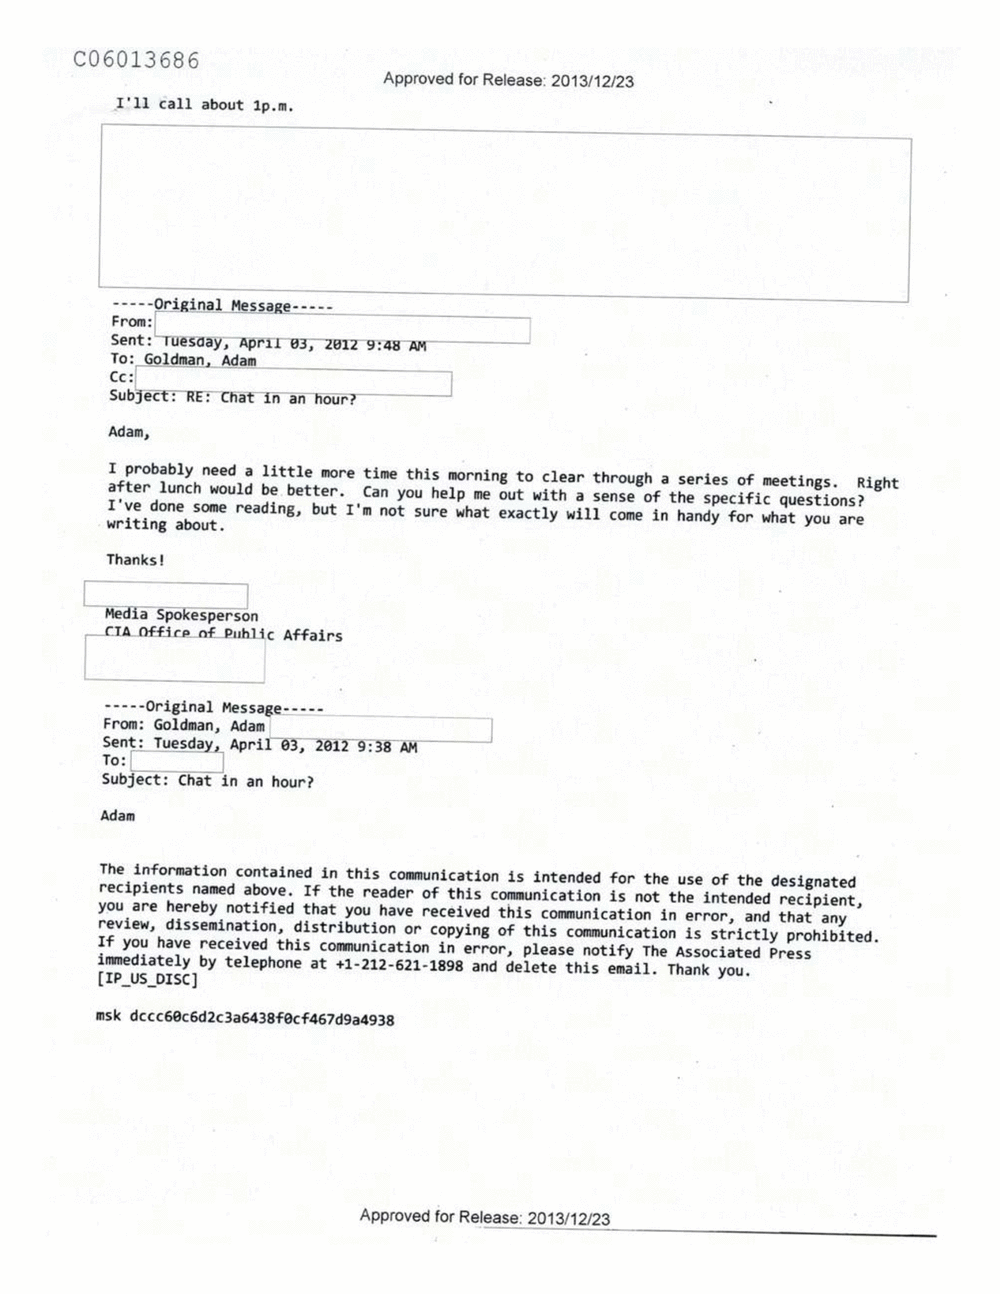 Page 543 from Email Correspondence Between Reporters and CIA Flacks